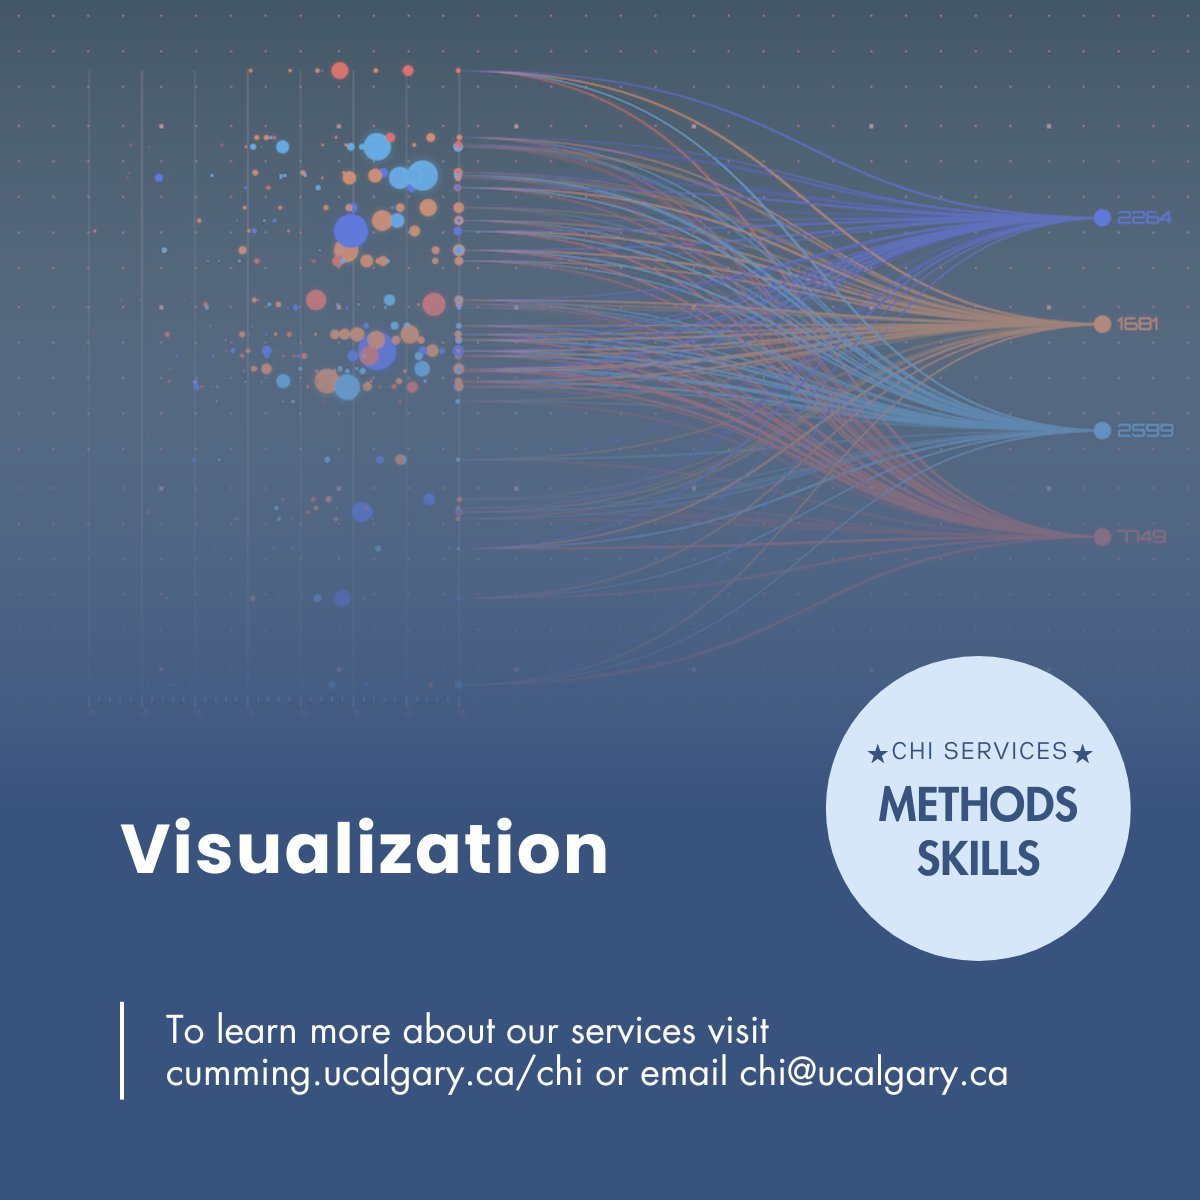 CHI analysts are available to help researchers create effective data visualization tools, so that teams are enabled to make data-driven decisions or present their findings without having to spend valuable time trying to wrangle raw data into an interpretable format.